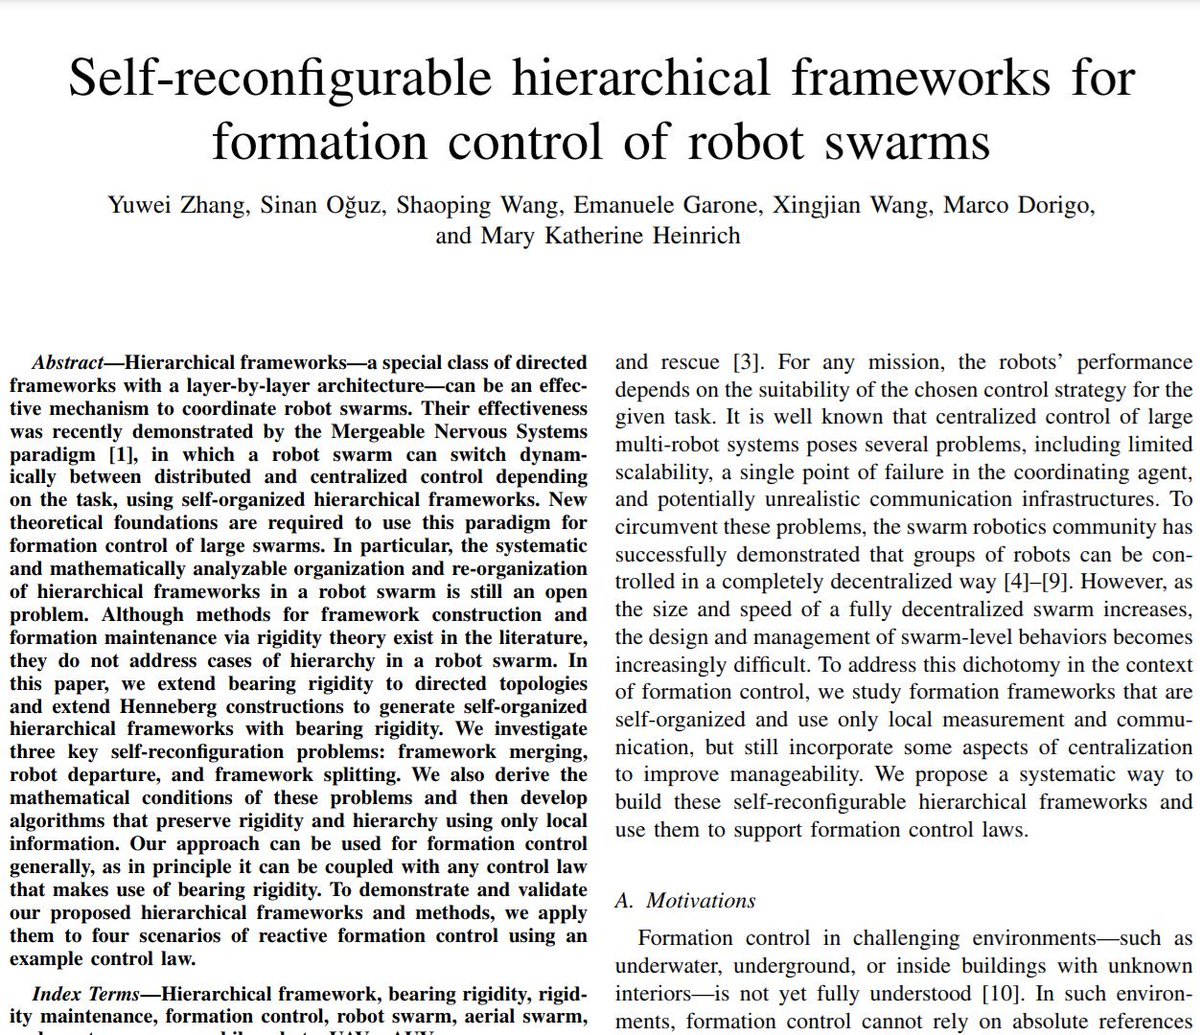 Now online! 📰

New IEEE T-Cybernetics paper on self-organizing and reconfigurable frameworks for #formation #control of #robot #swarms. 

👾 👾 ↔️ 👾 👾 ↔️ 👾 👾

ieeexplore.ieee.org/document/10036…

Y. Zhang, @sinannoguzz, S. Wang, @EmanueleGarone, X. Wang, @MarcoDorigo_ULB, @mktheinrich